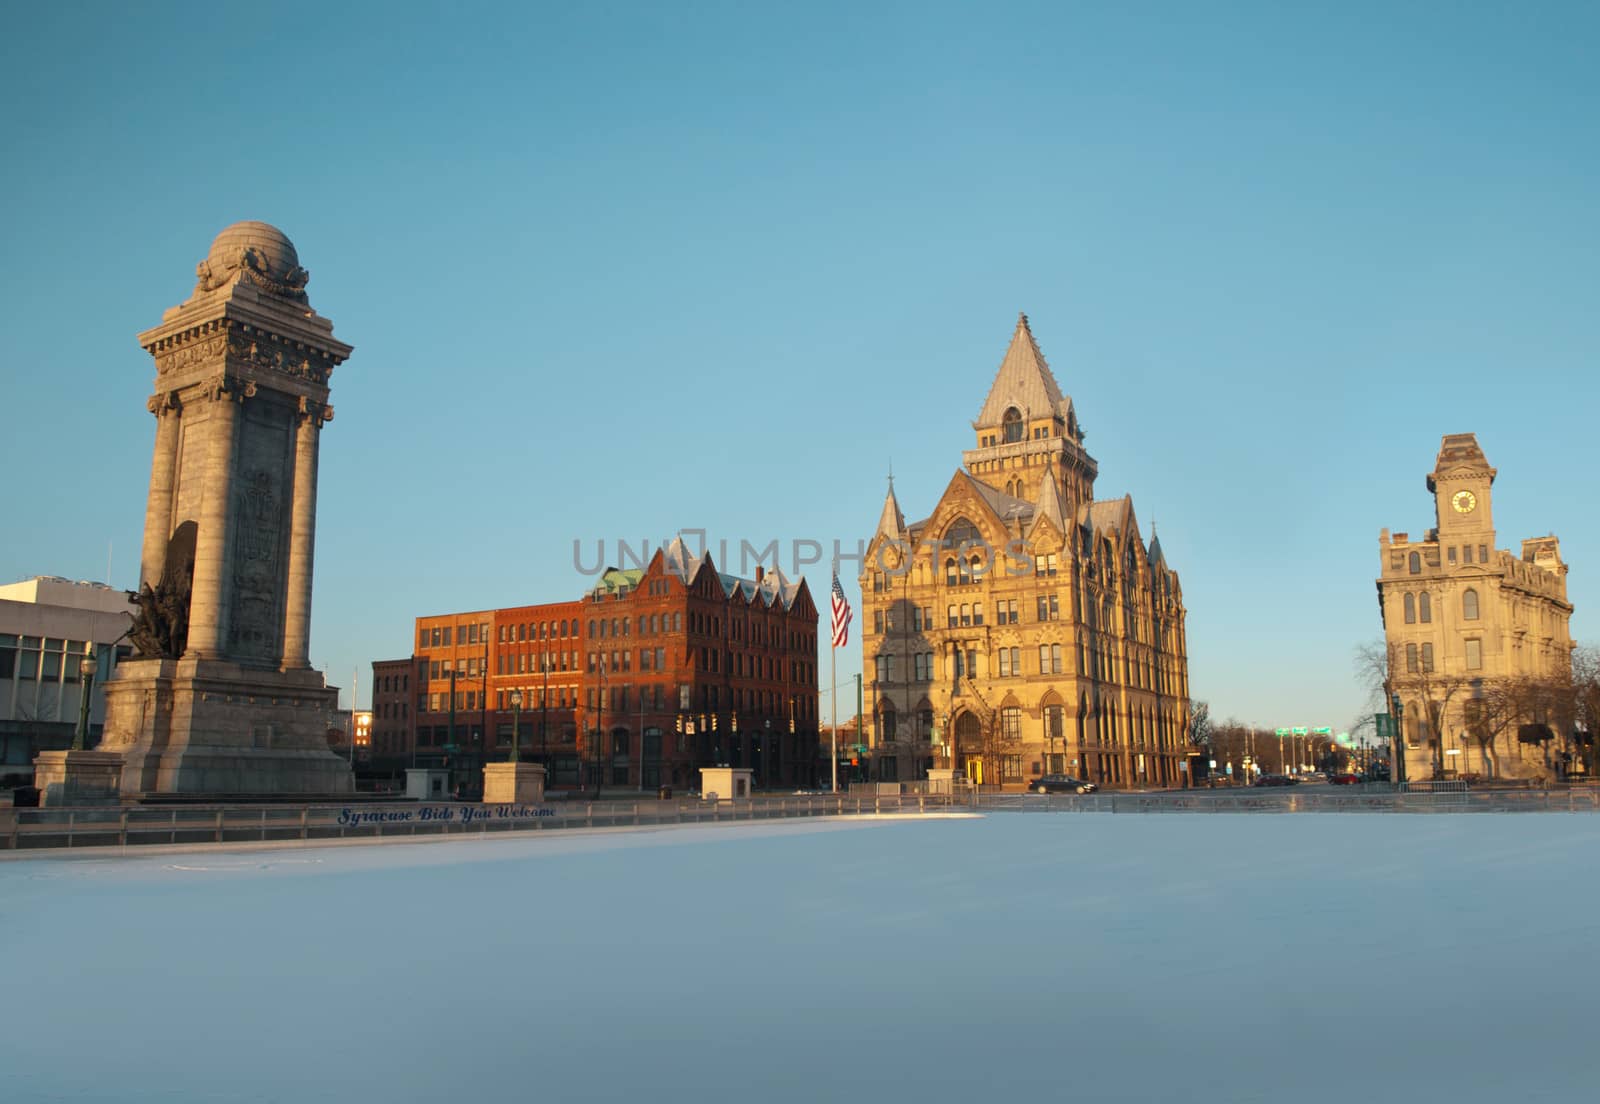 view of syracuse, new york in the wintertime